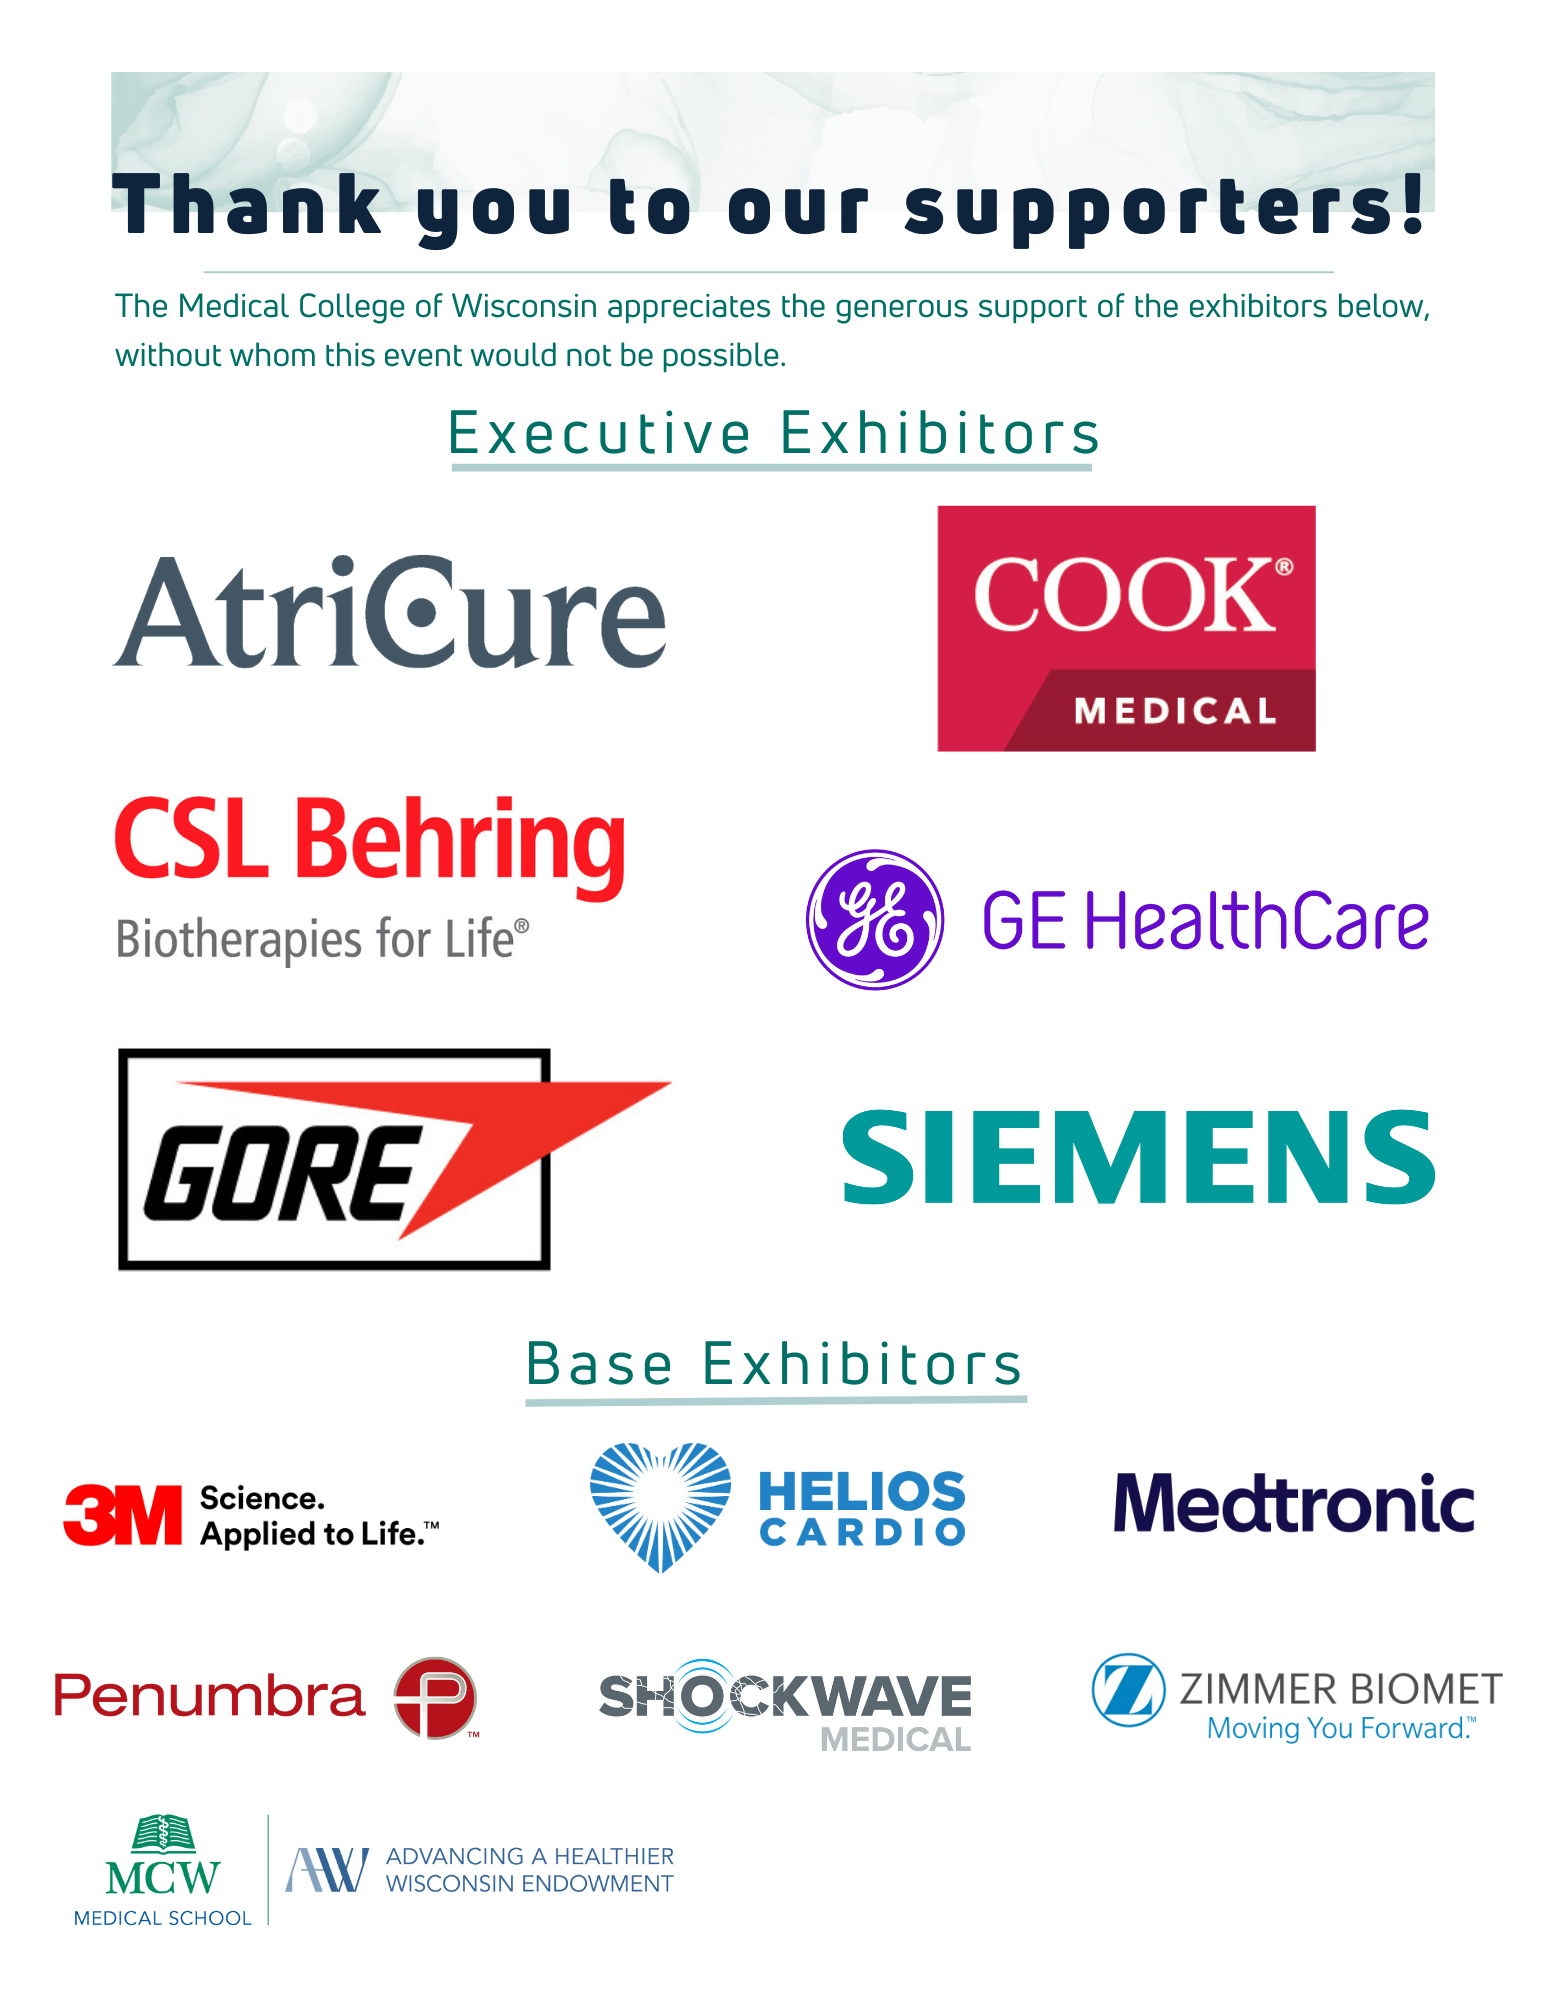 Thank you to the sponsors of the symposium!